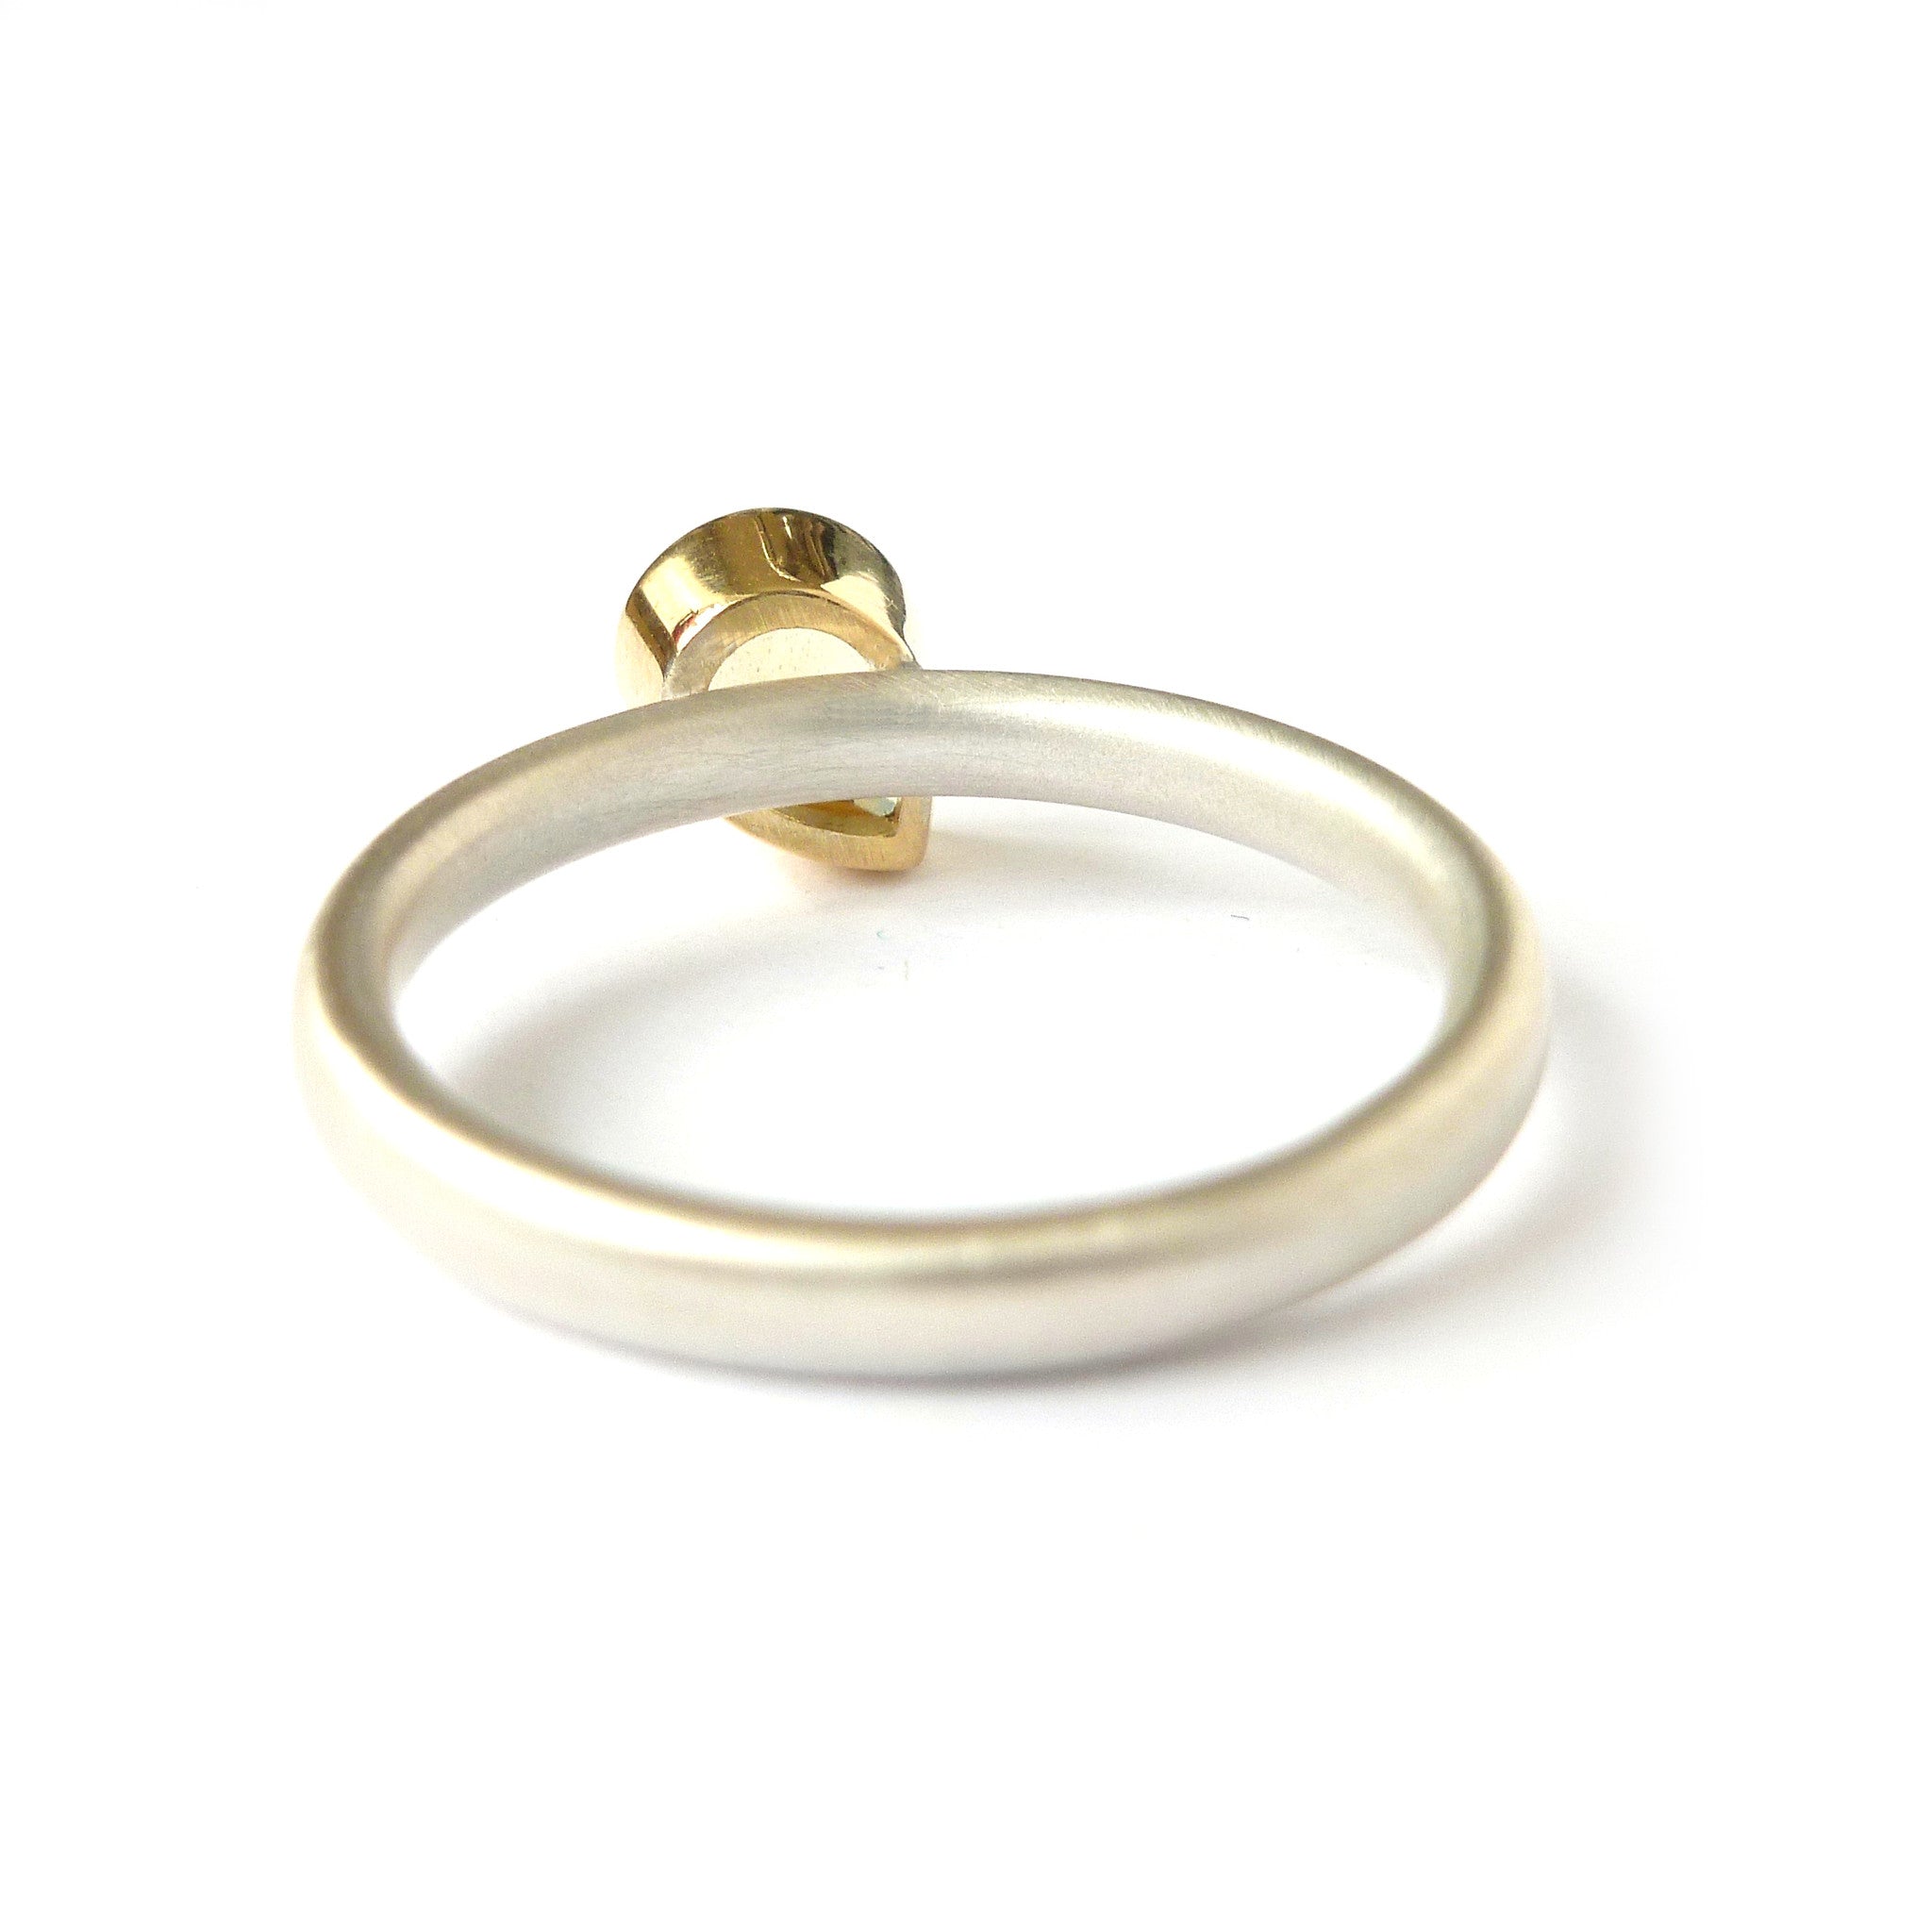 Silver, 18ct gold and yellow sapphire ring - modern and unique - Sue Lane